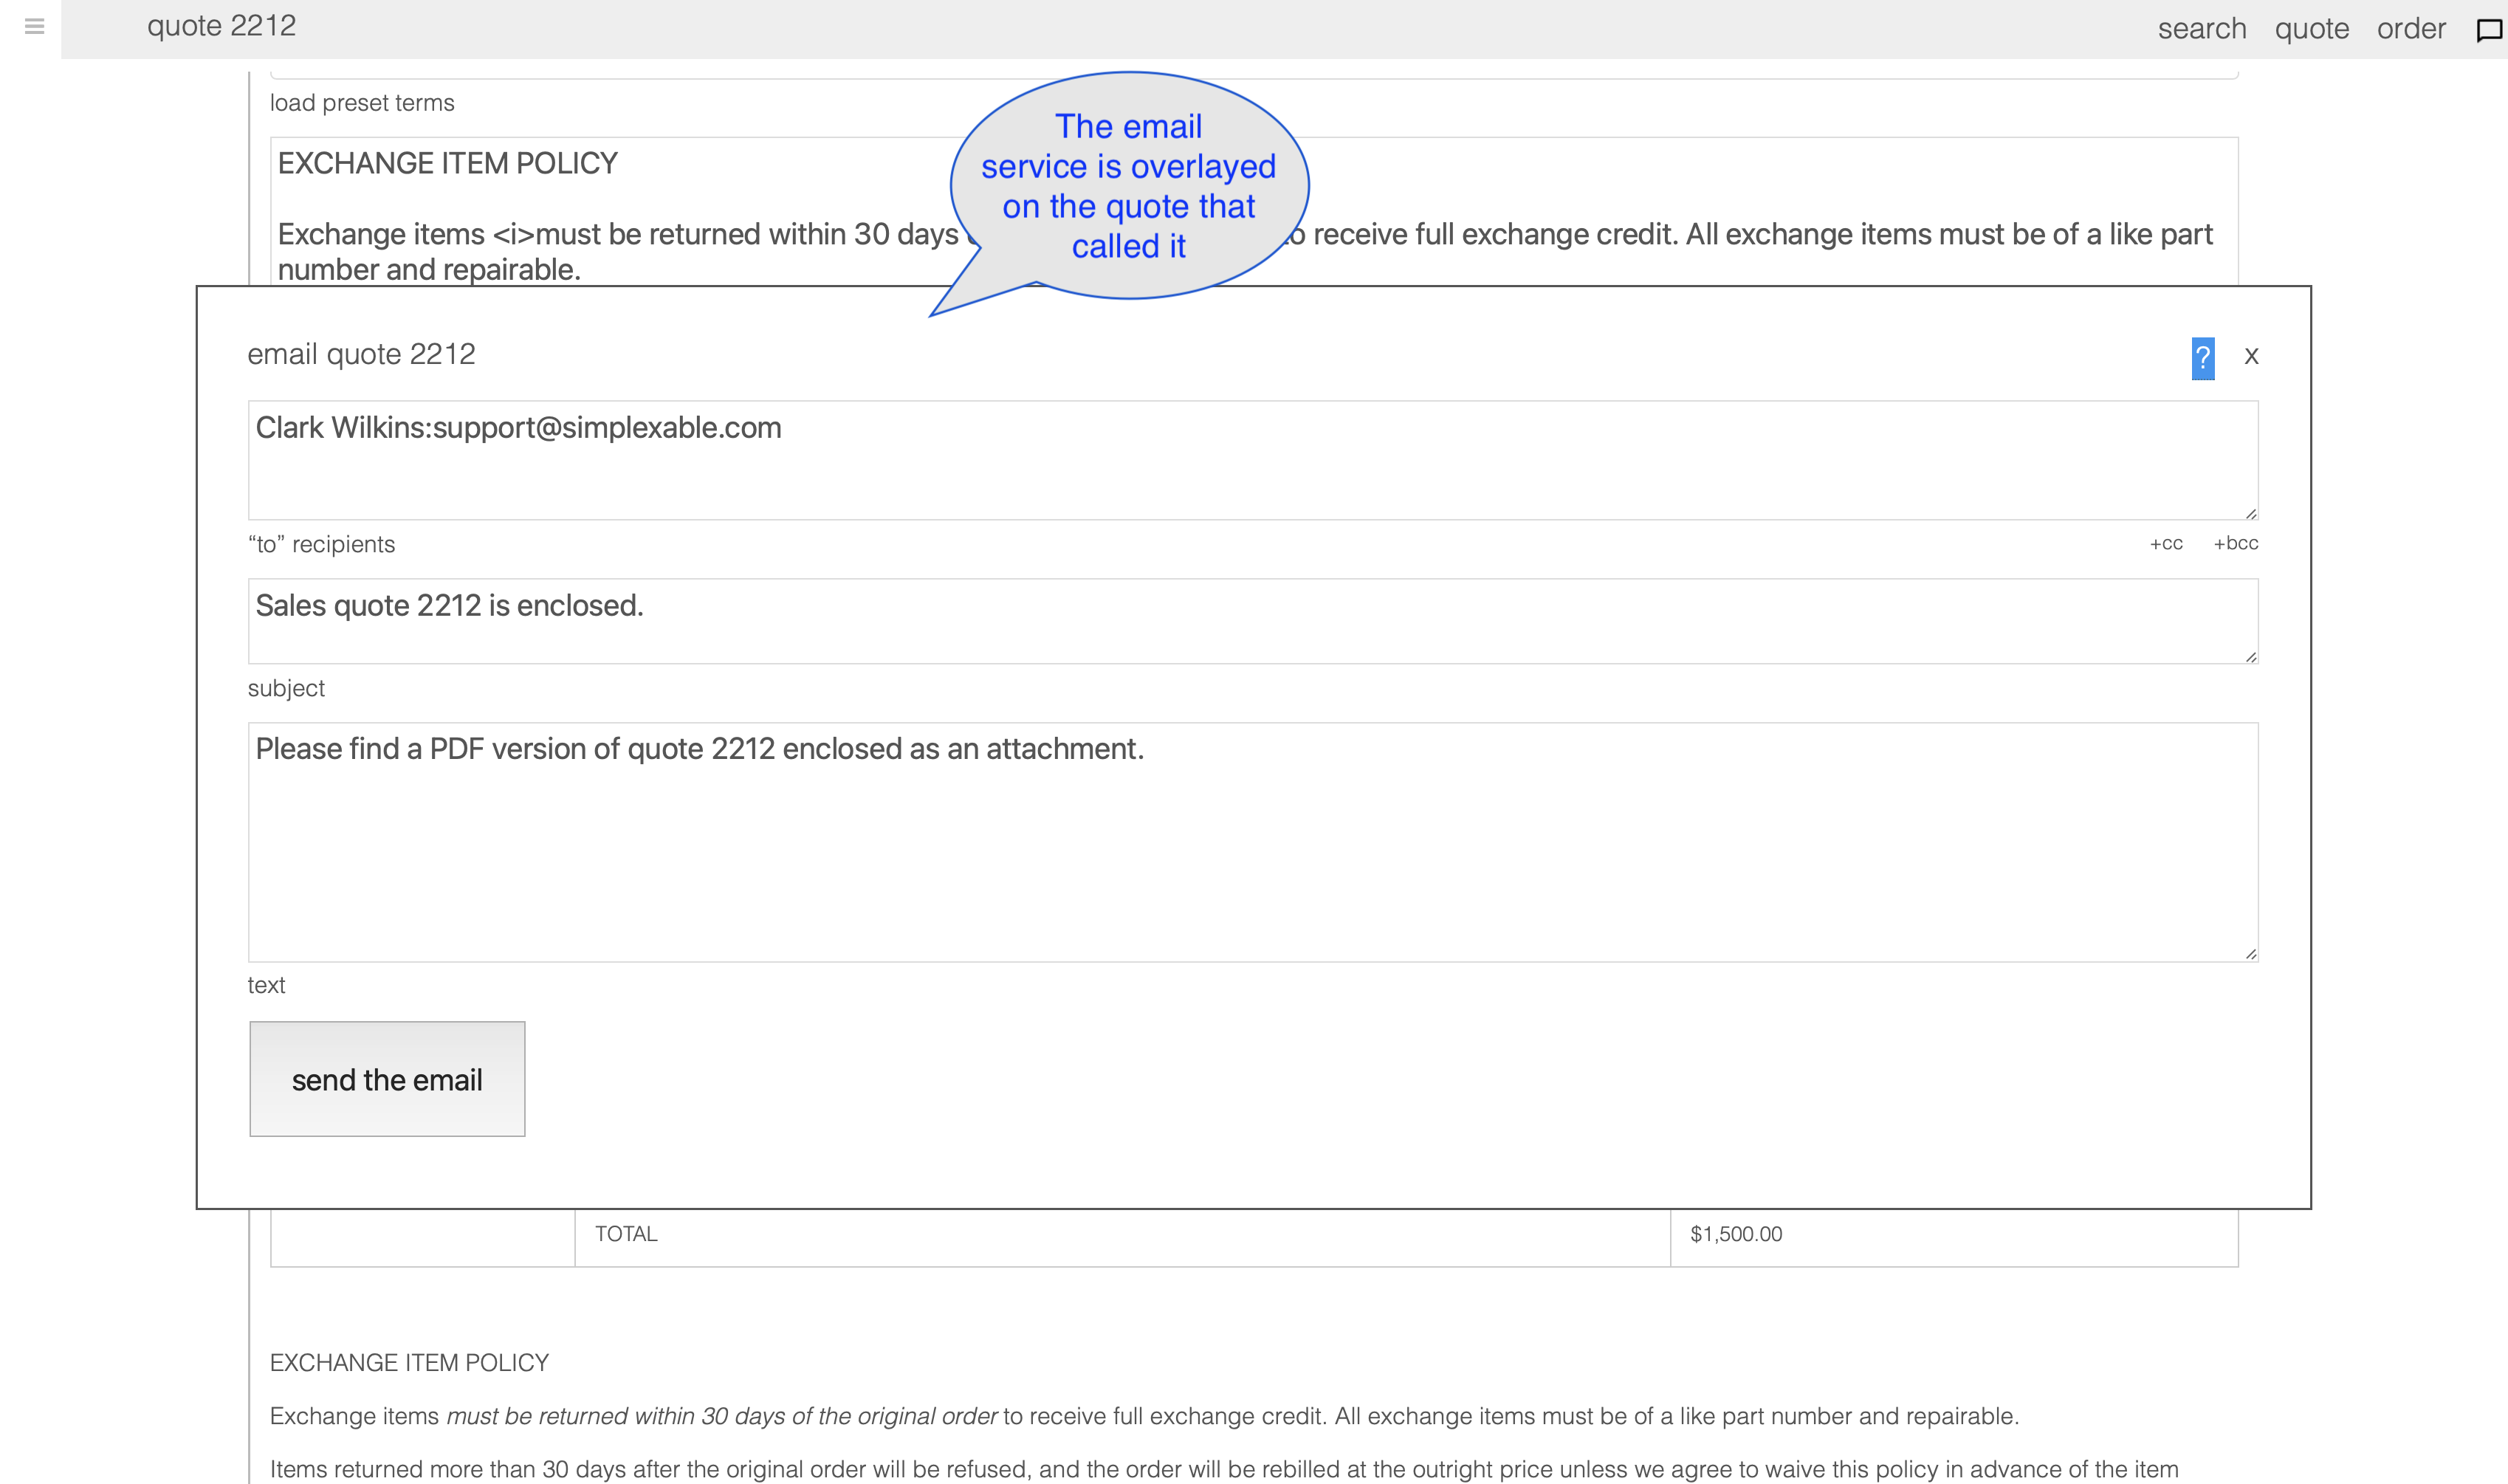 Sample of the standard email interface shown in a stockd sales quote